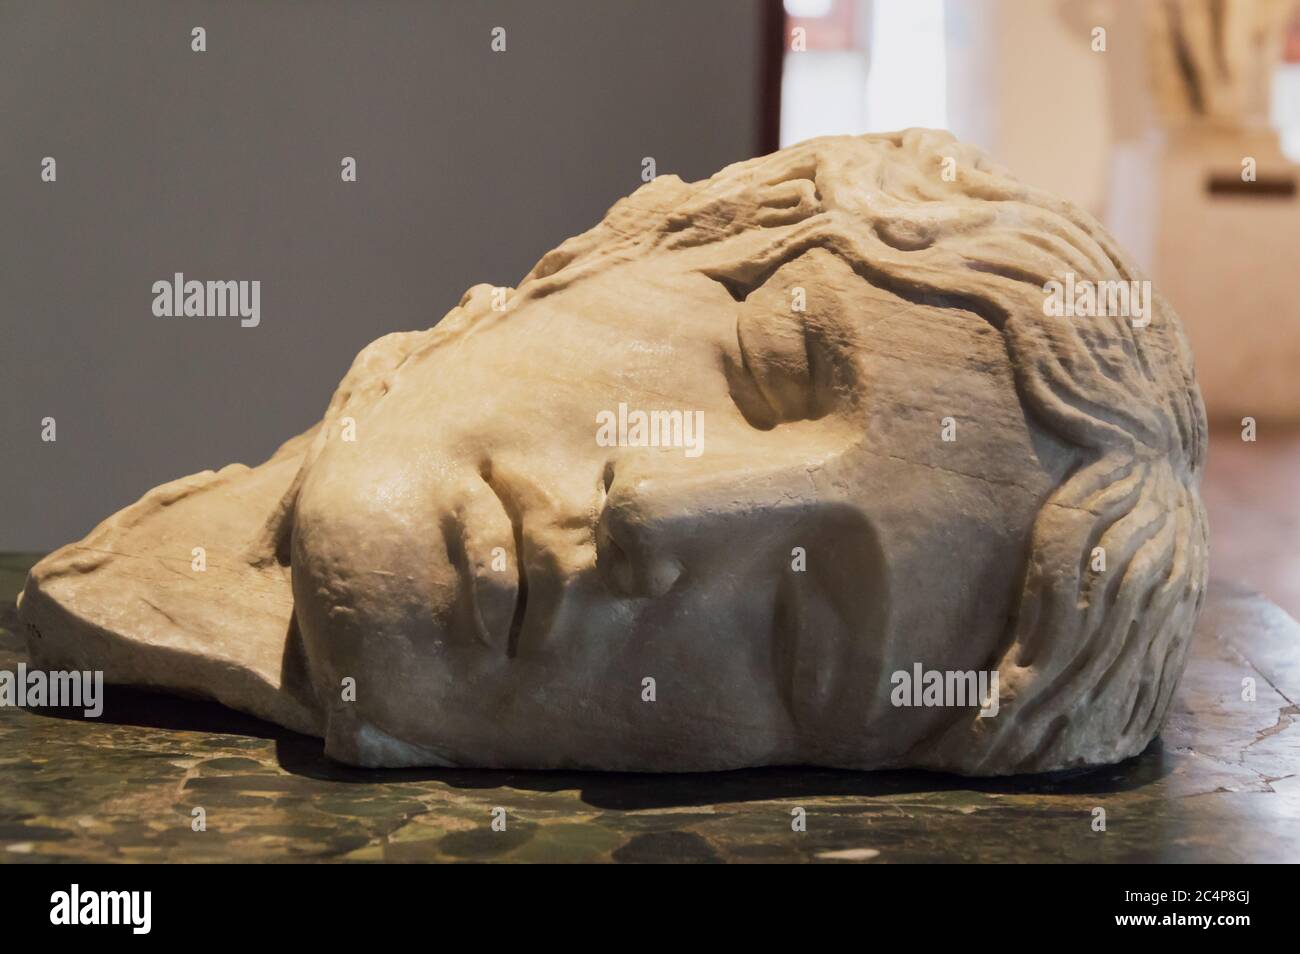 Face of ancient roman marble sculpture showing a young man sleeping Stock Photo